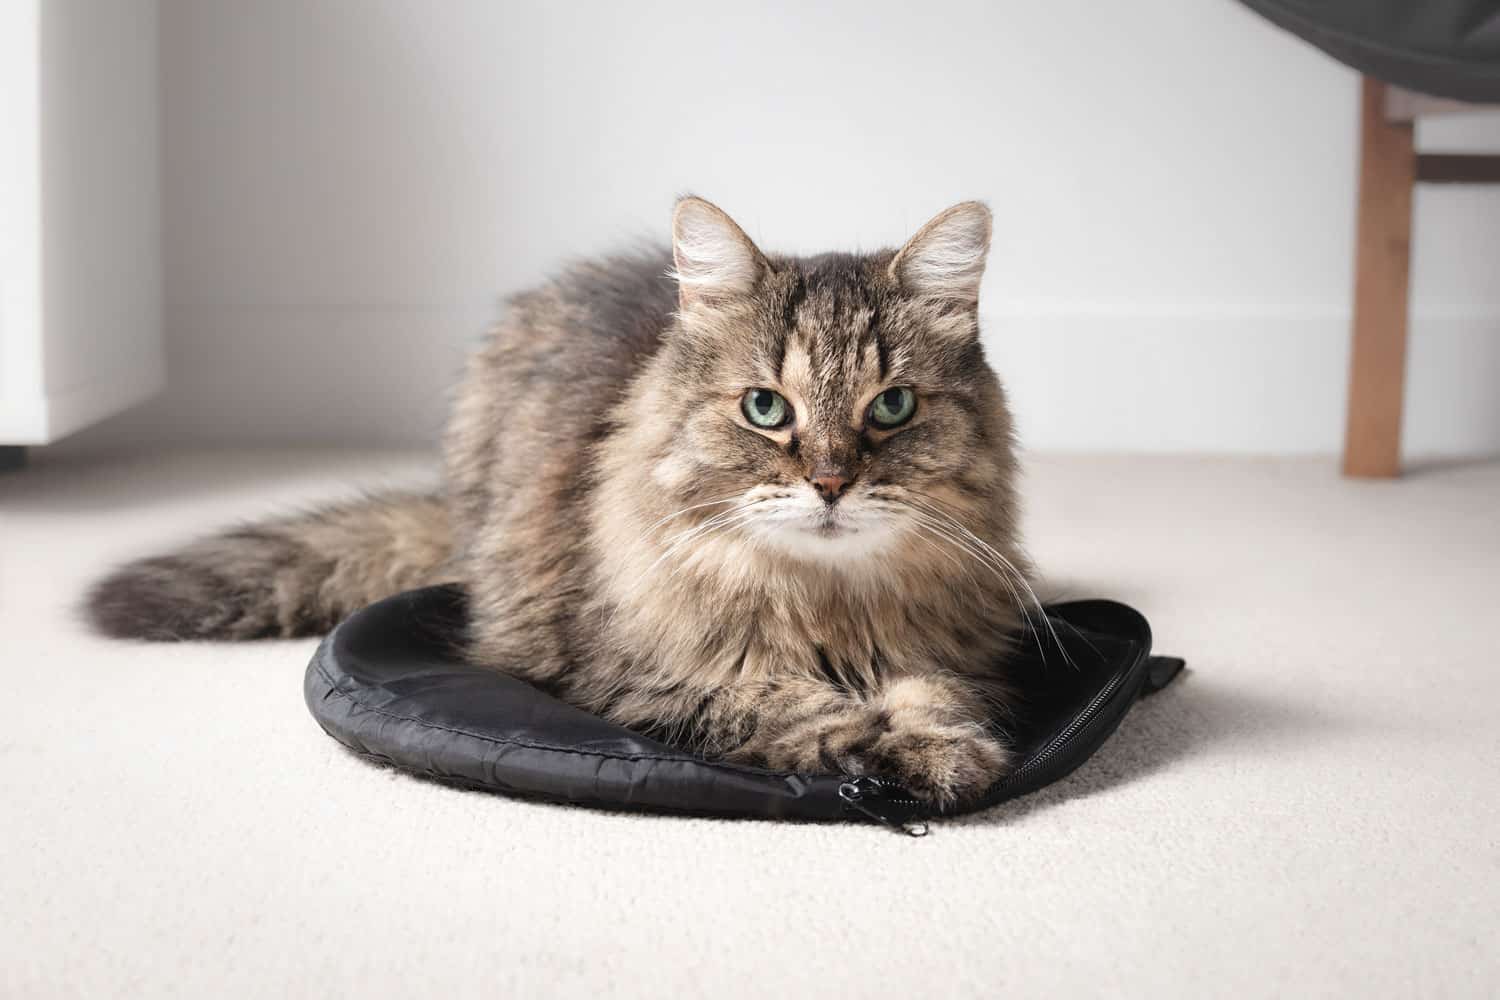 Tabby cat sitting on bag while looking at camera. Cute fluffy cat lying on something on the floor. Concept for why cats lie on everything or sit on things. 16 years old senior cat. Selective focus.
